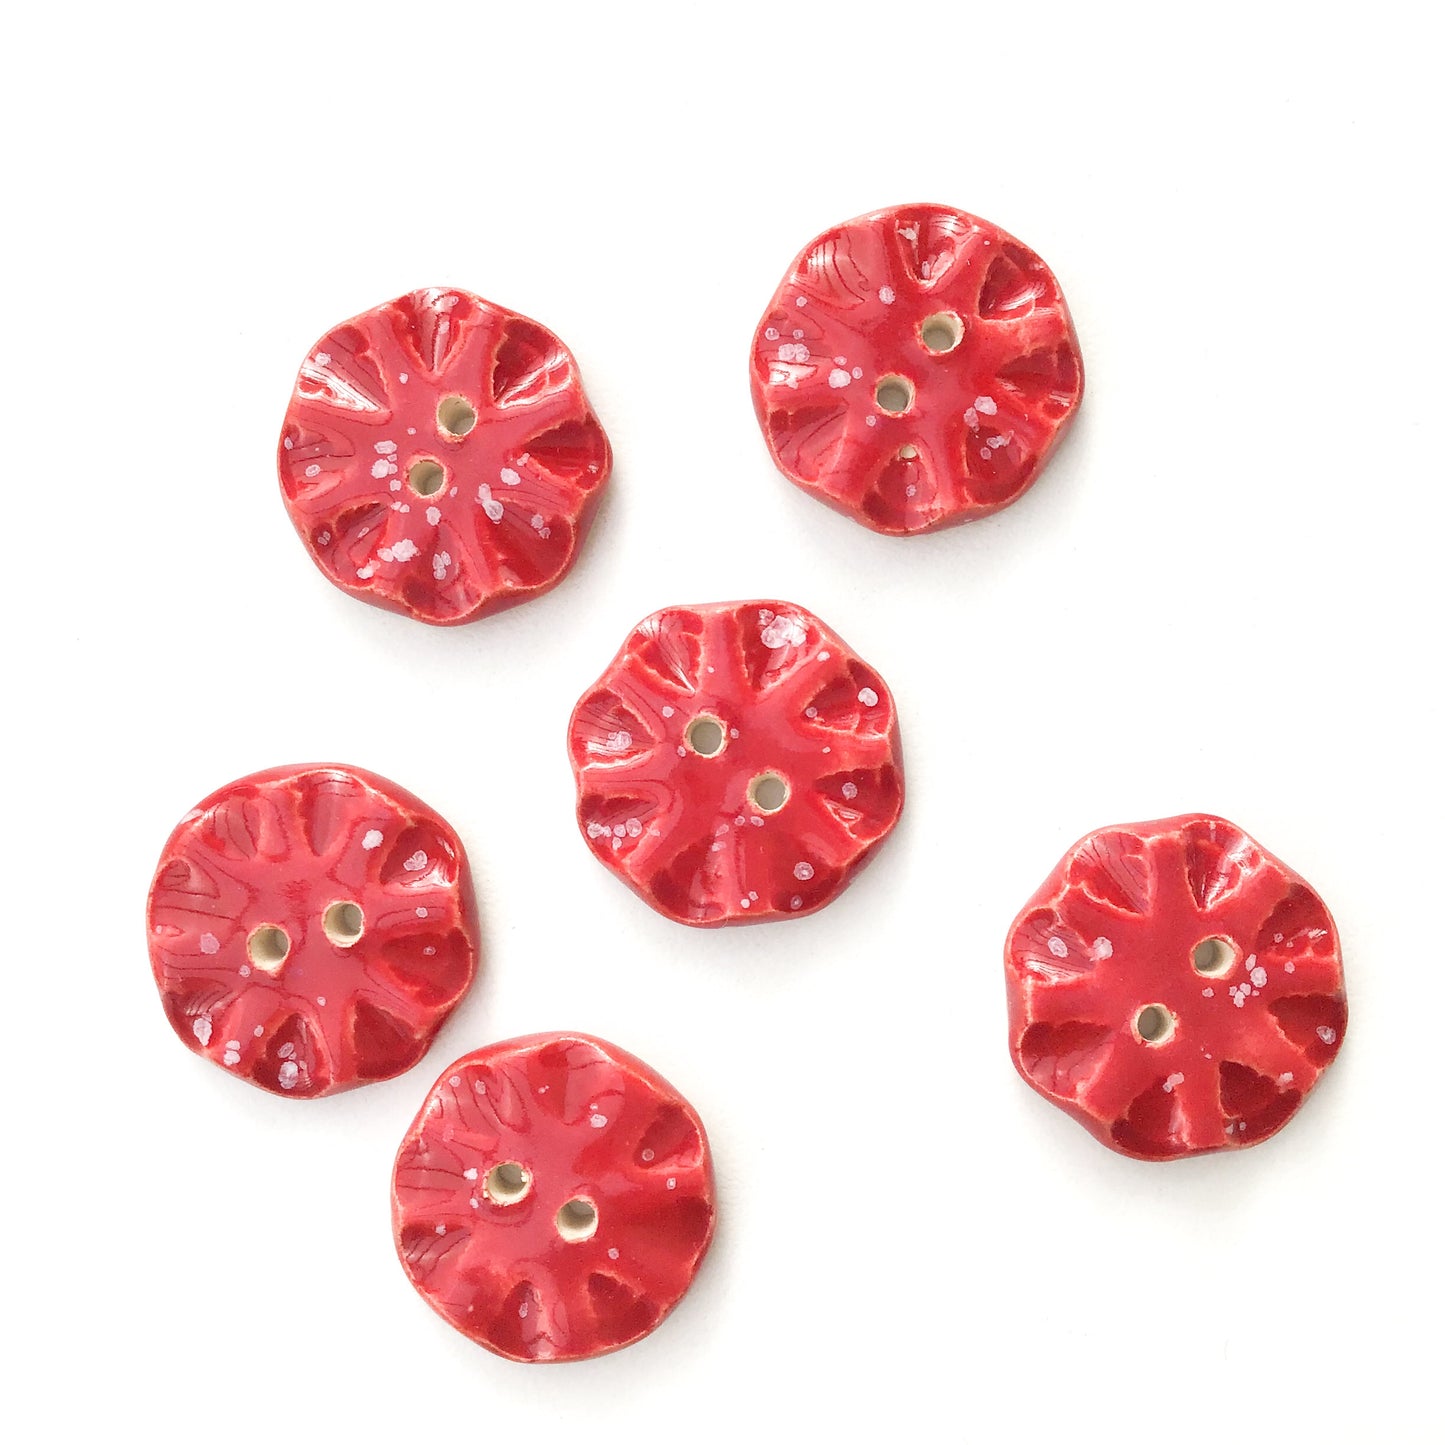 Speckled Red Ceramic Buttons - Red Clay Buttons - 3/4" - 6 Pack